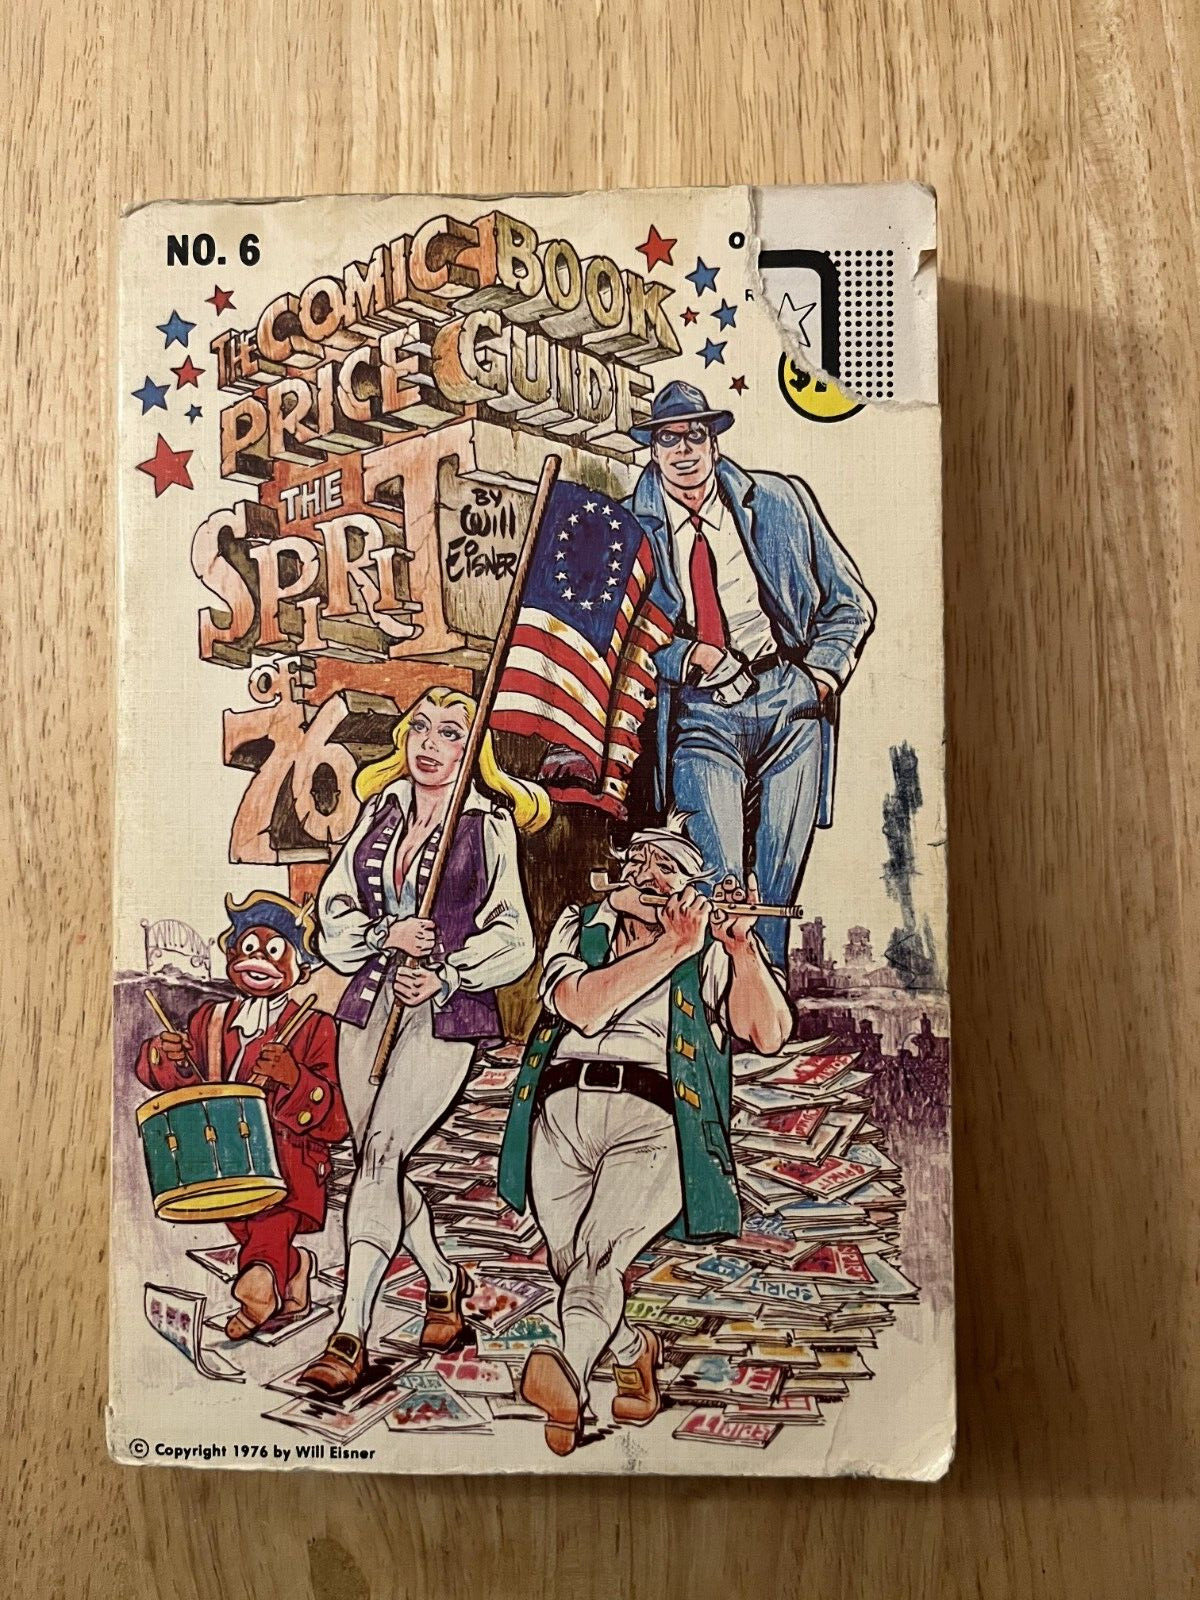 THE OVERSTREET COMIC BOOK PRICE GUIDE #6 1976 SOFT COVER